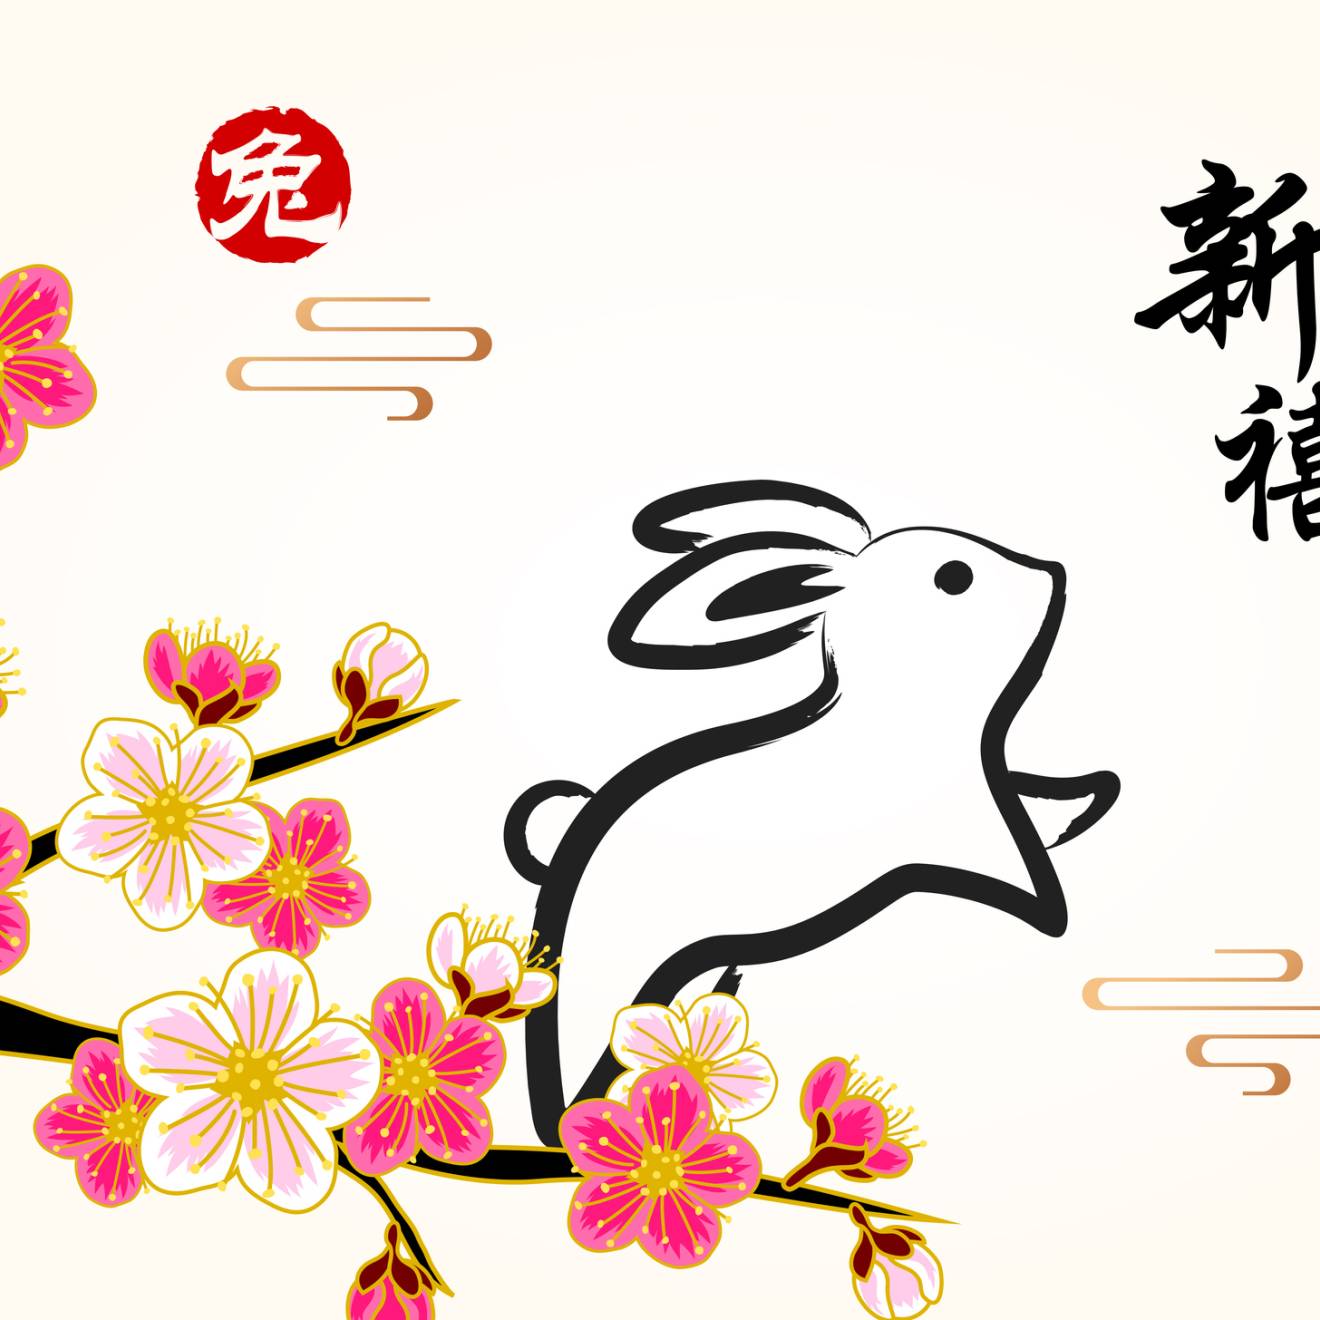 Celebrate Year of the Rabbit 2023 with rabbit Chinese painting on the plum blossom background, the Chinese stamp means rabbit and the vertical Chinese couplet means best wishes for the year to come